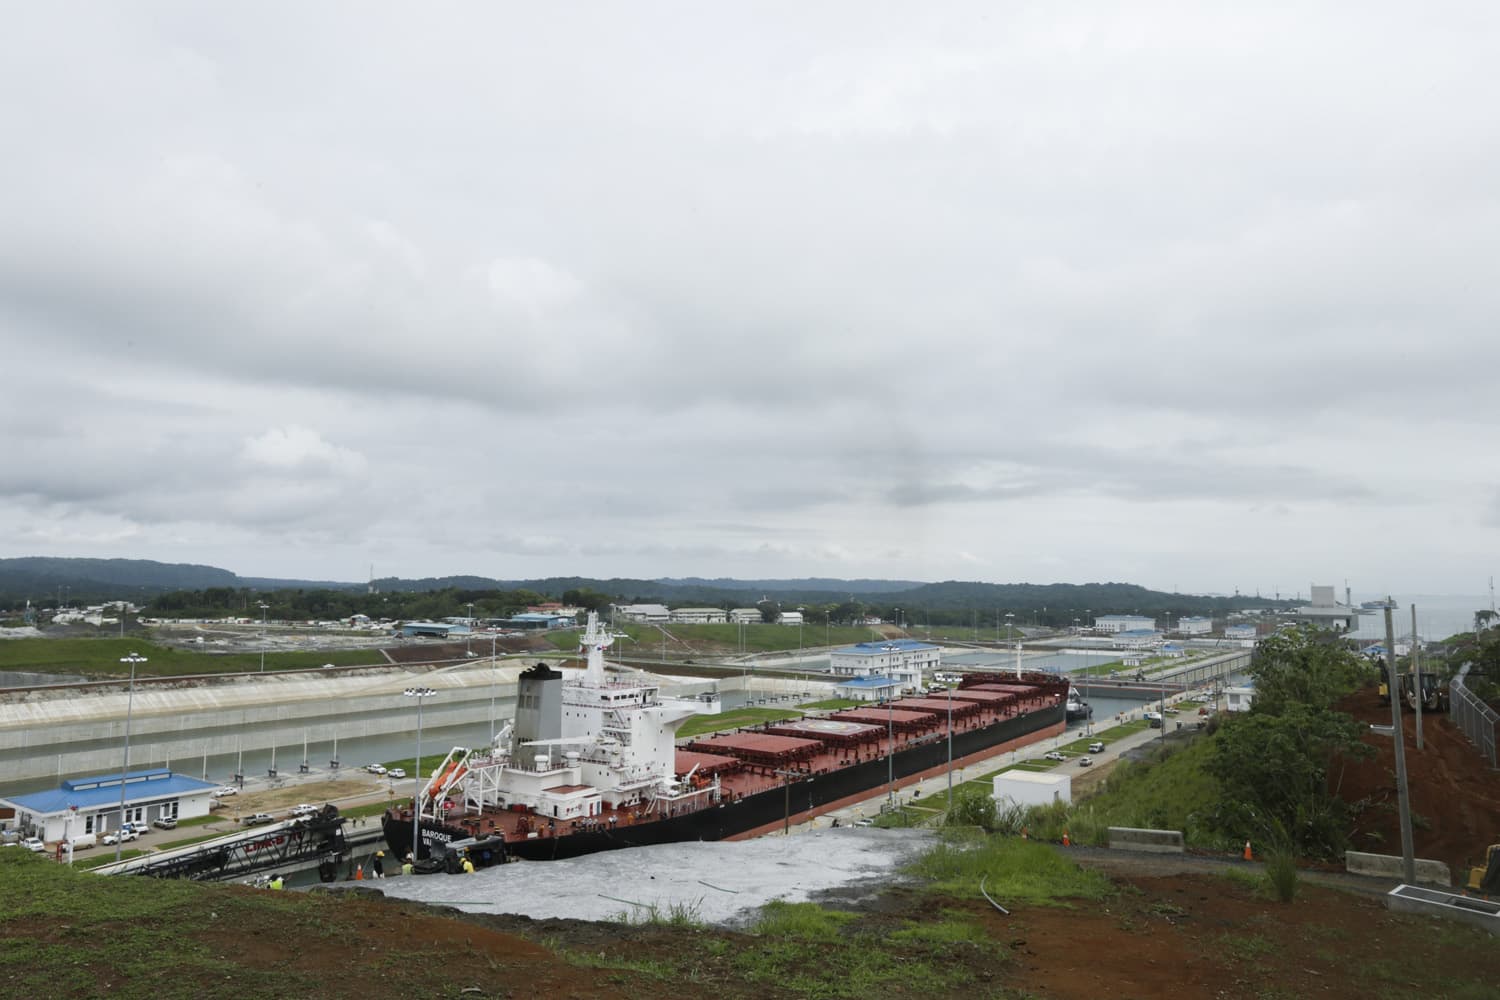 The Malta flagged cargo ship named Baroque, a post-Panamax vessel, navigates the Agua Clara locks on the second test day of the newly expanded Panama Canal in Agua Clara, Panama, (Arnulfo Franco/AP)